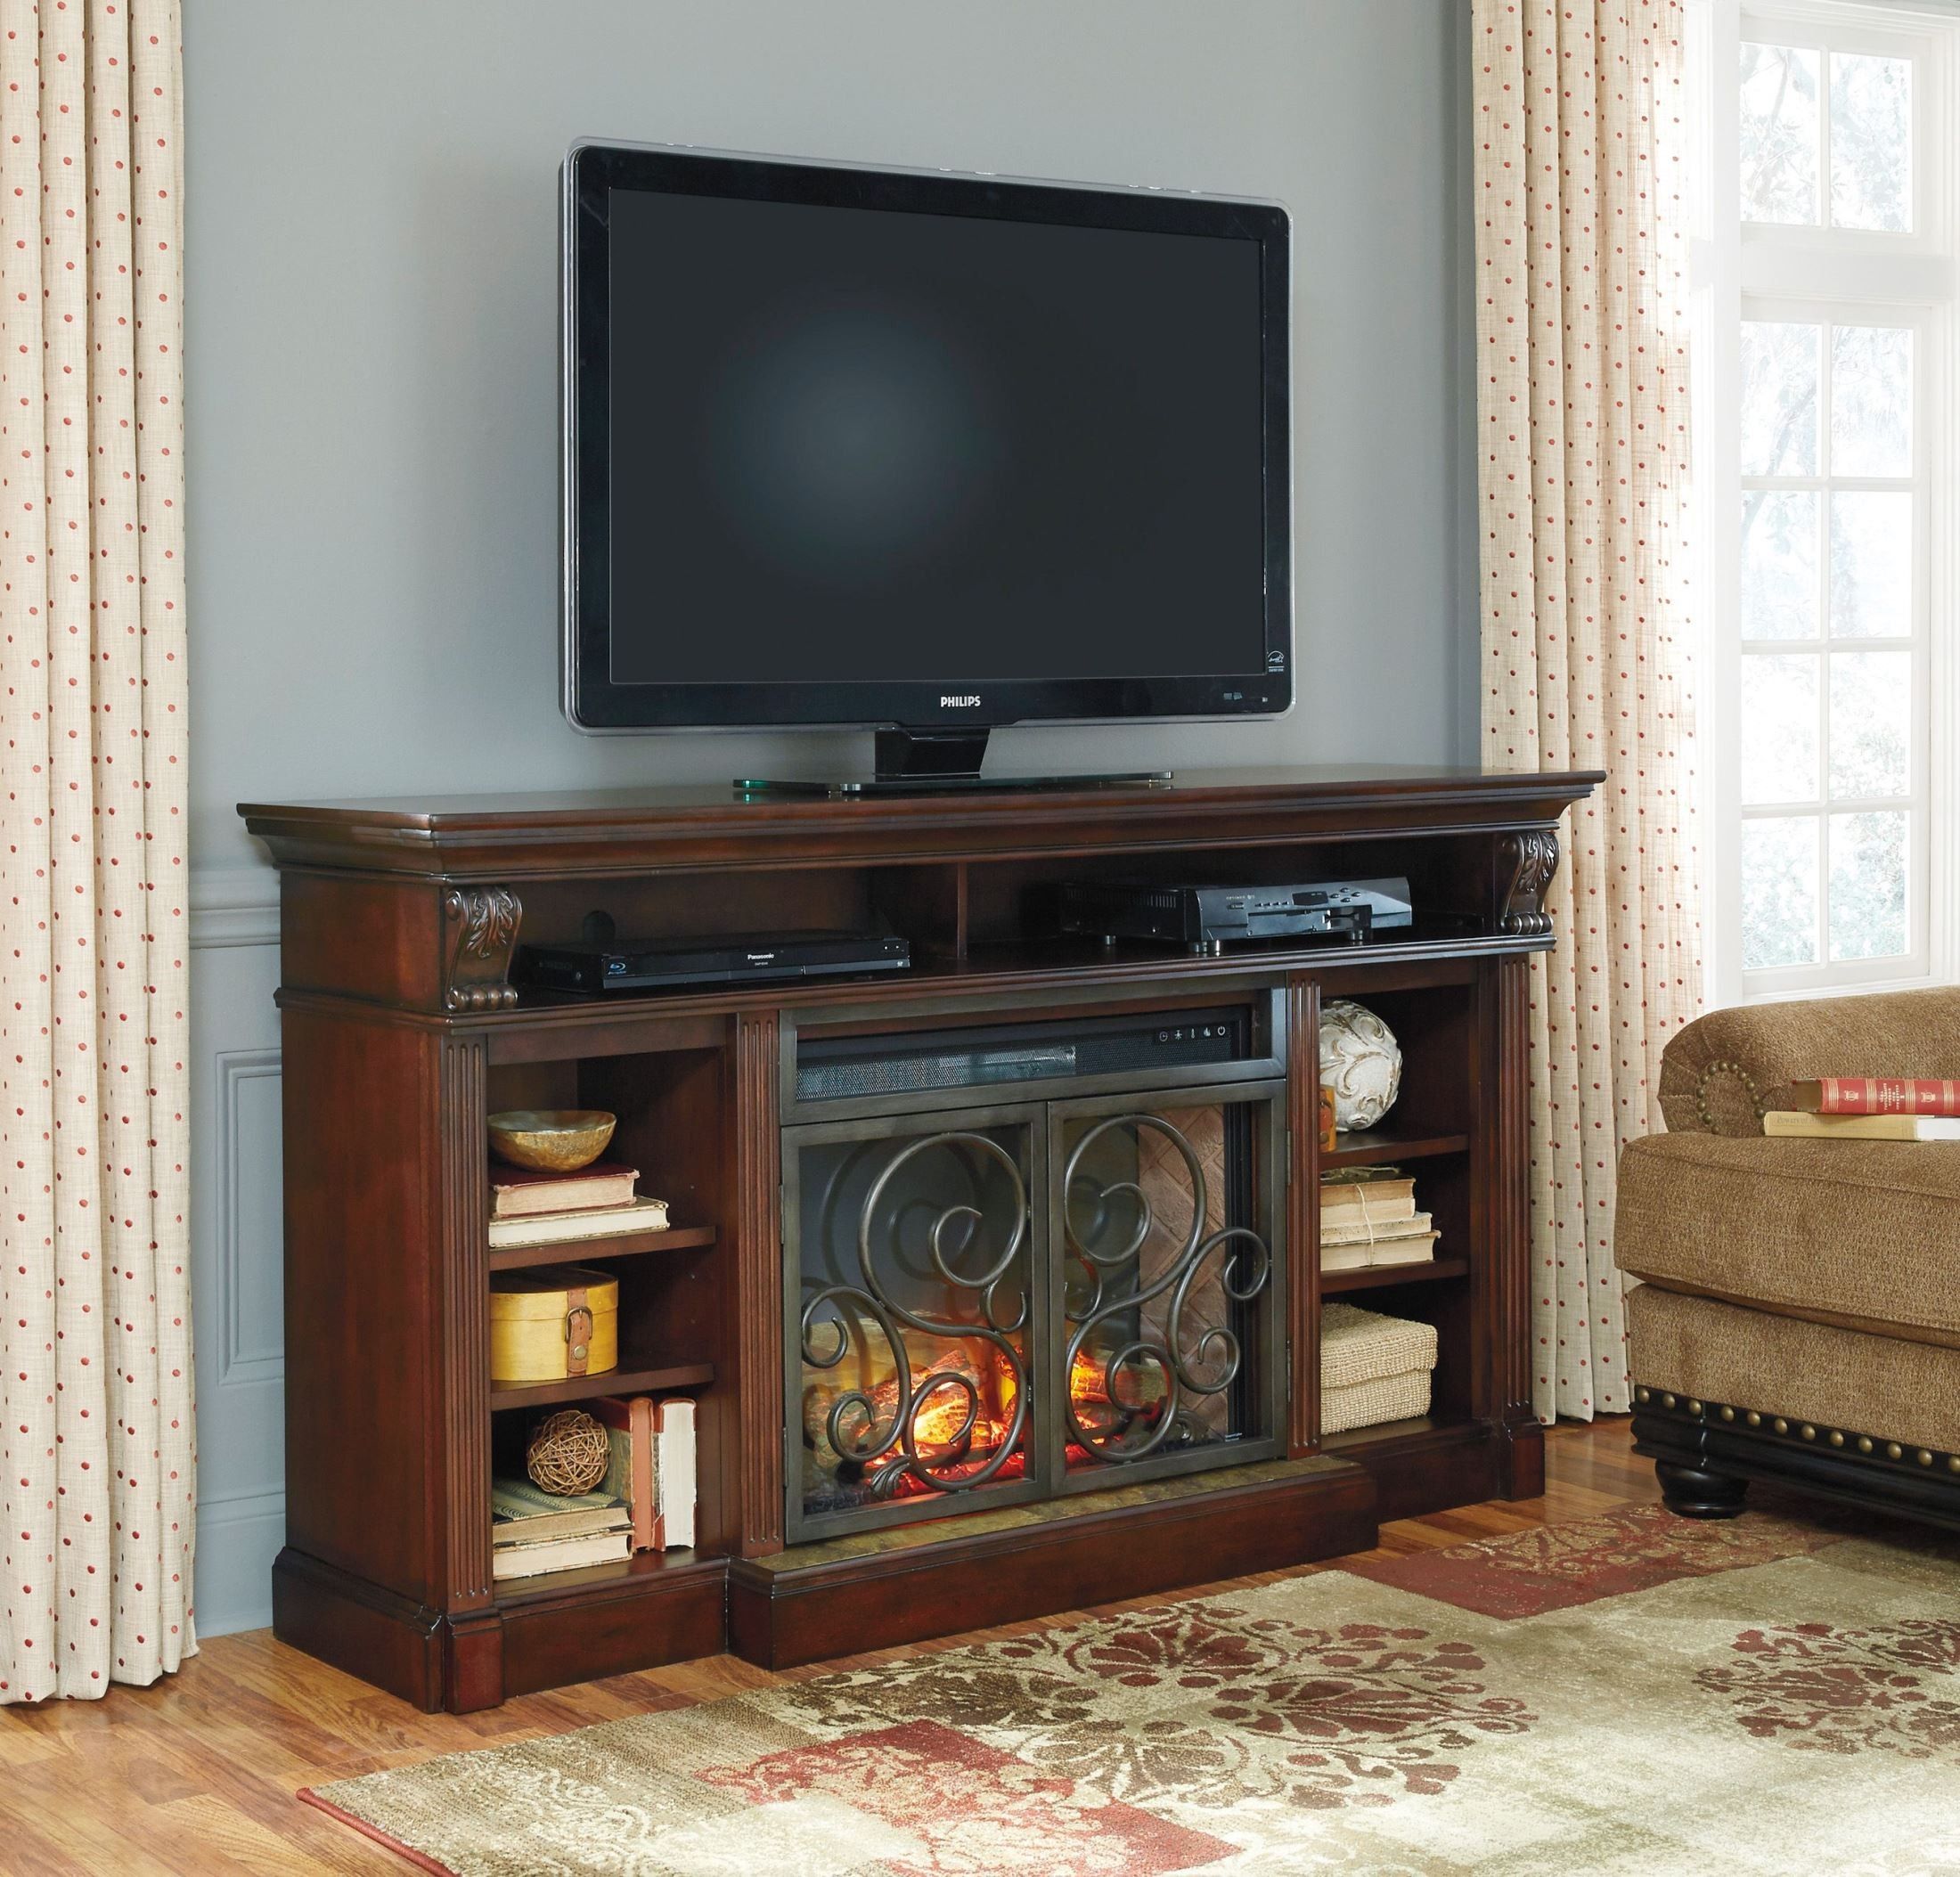 Ashley Entertainment Center with Fireplace Inspirational ashley Furniture attic Fireplaces